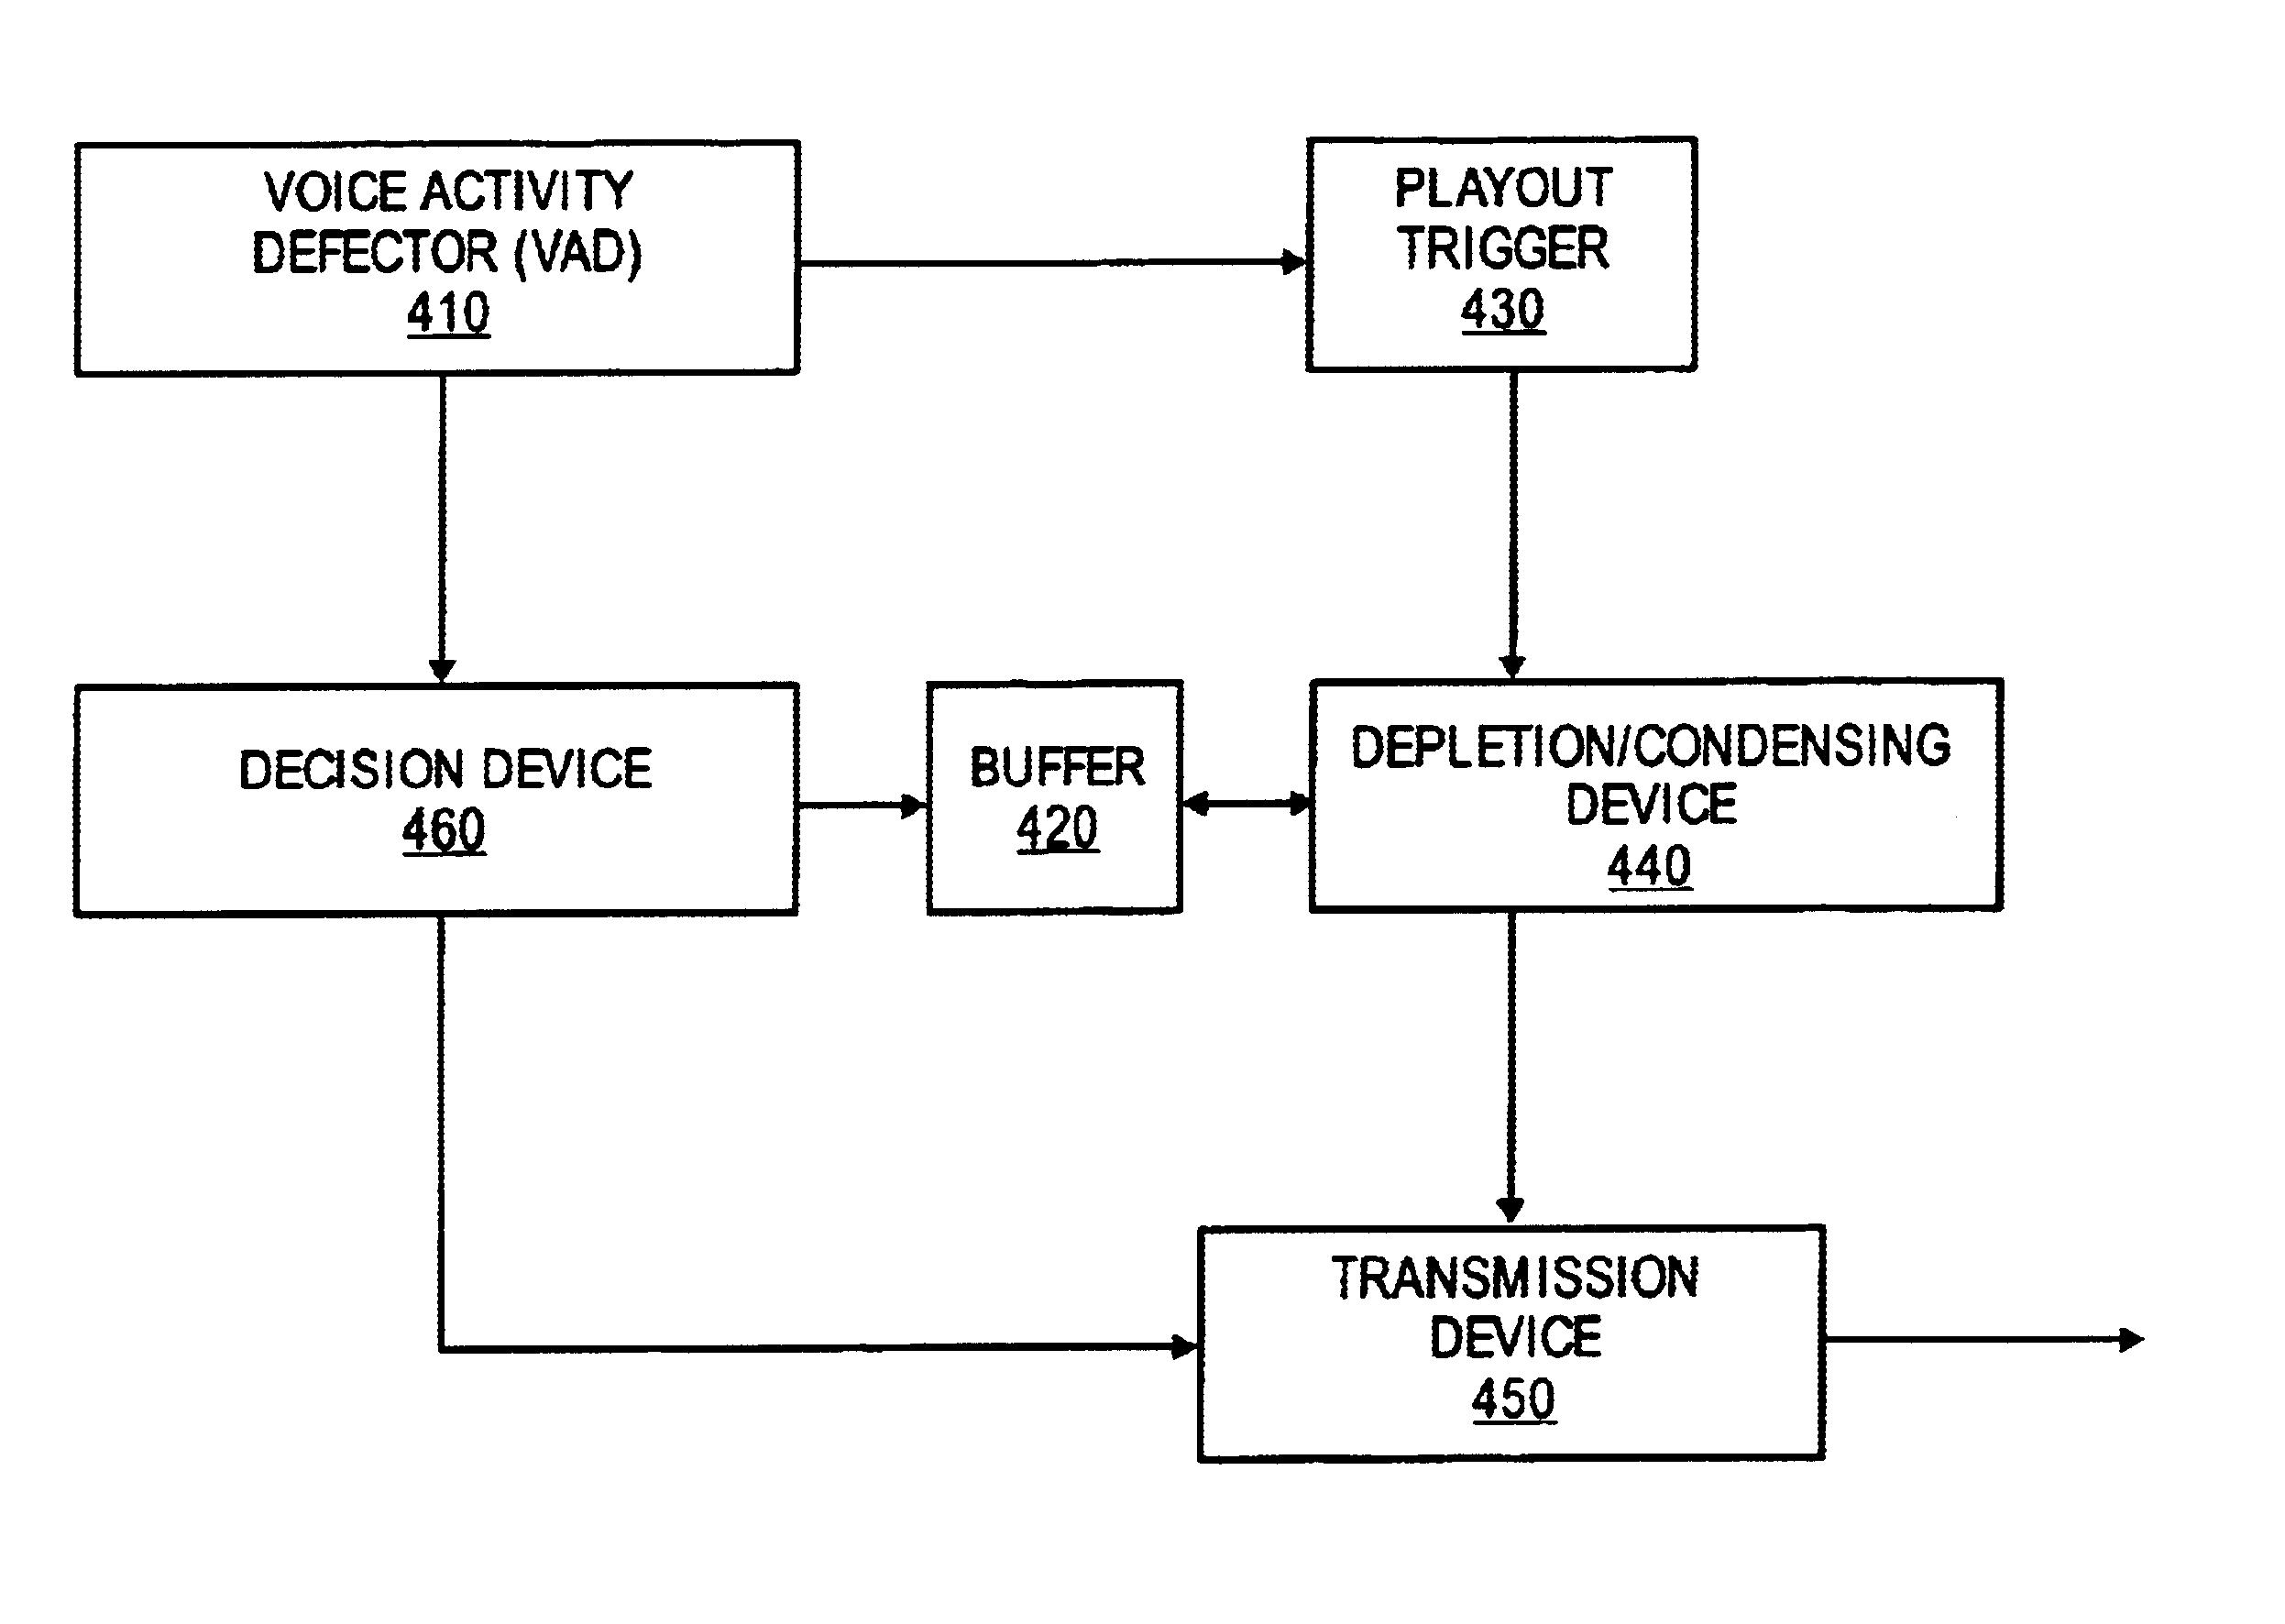 Elimination of clipping associated with VAD-directed silence suppression